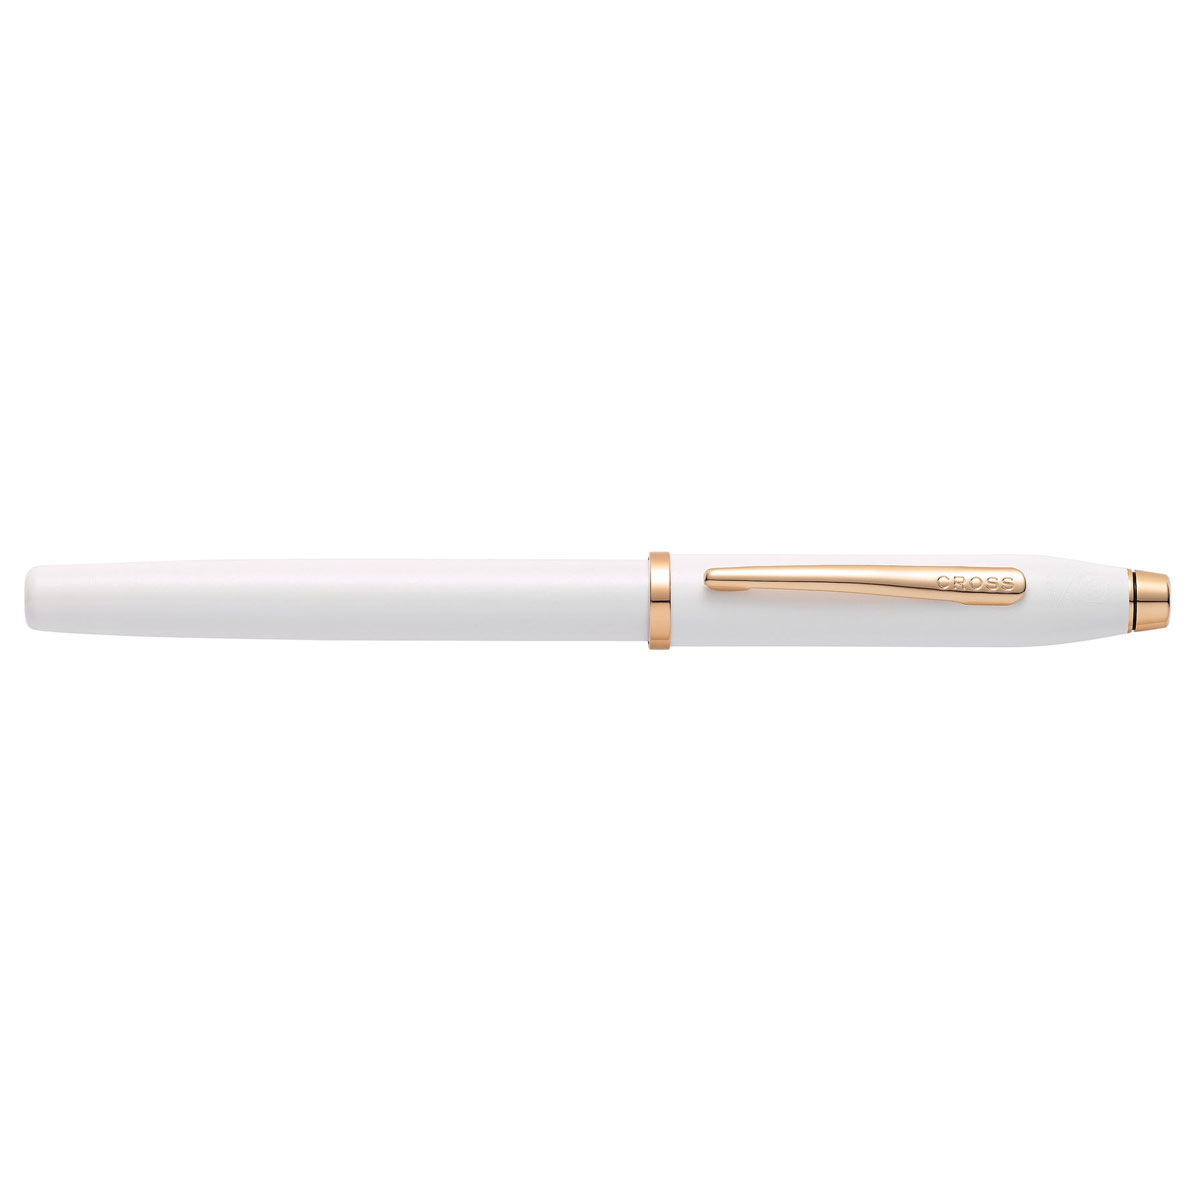 Cross Fountain Pen - Century II Pearlescent White Lacquer, Medium | AT0086-113MF  $29 w/ Free Shipping at My Gift Shop